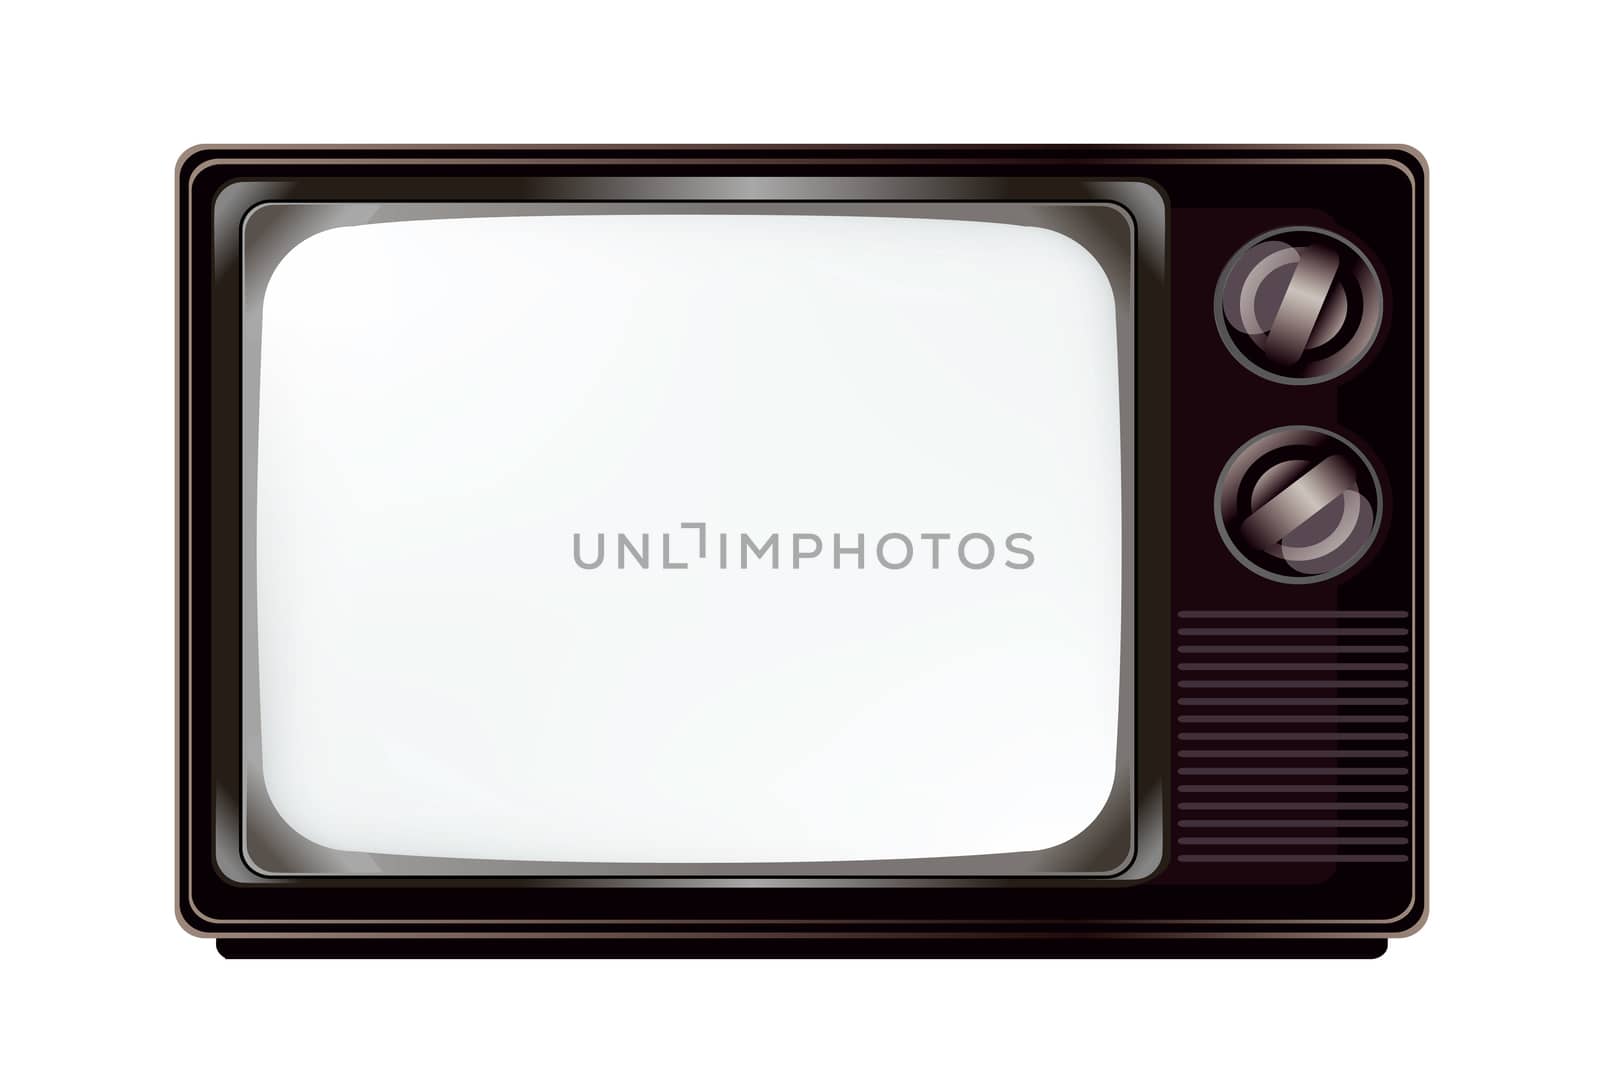 Isolated vintage television with empty screen mockup template by cougarsan